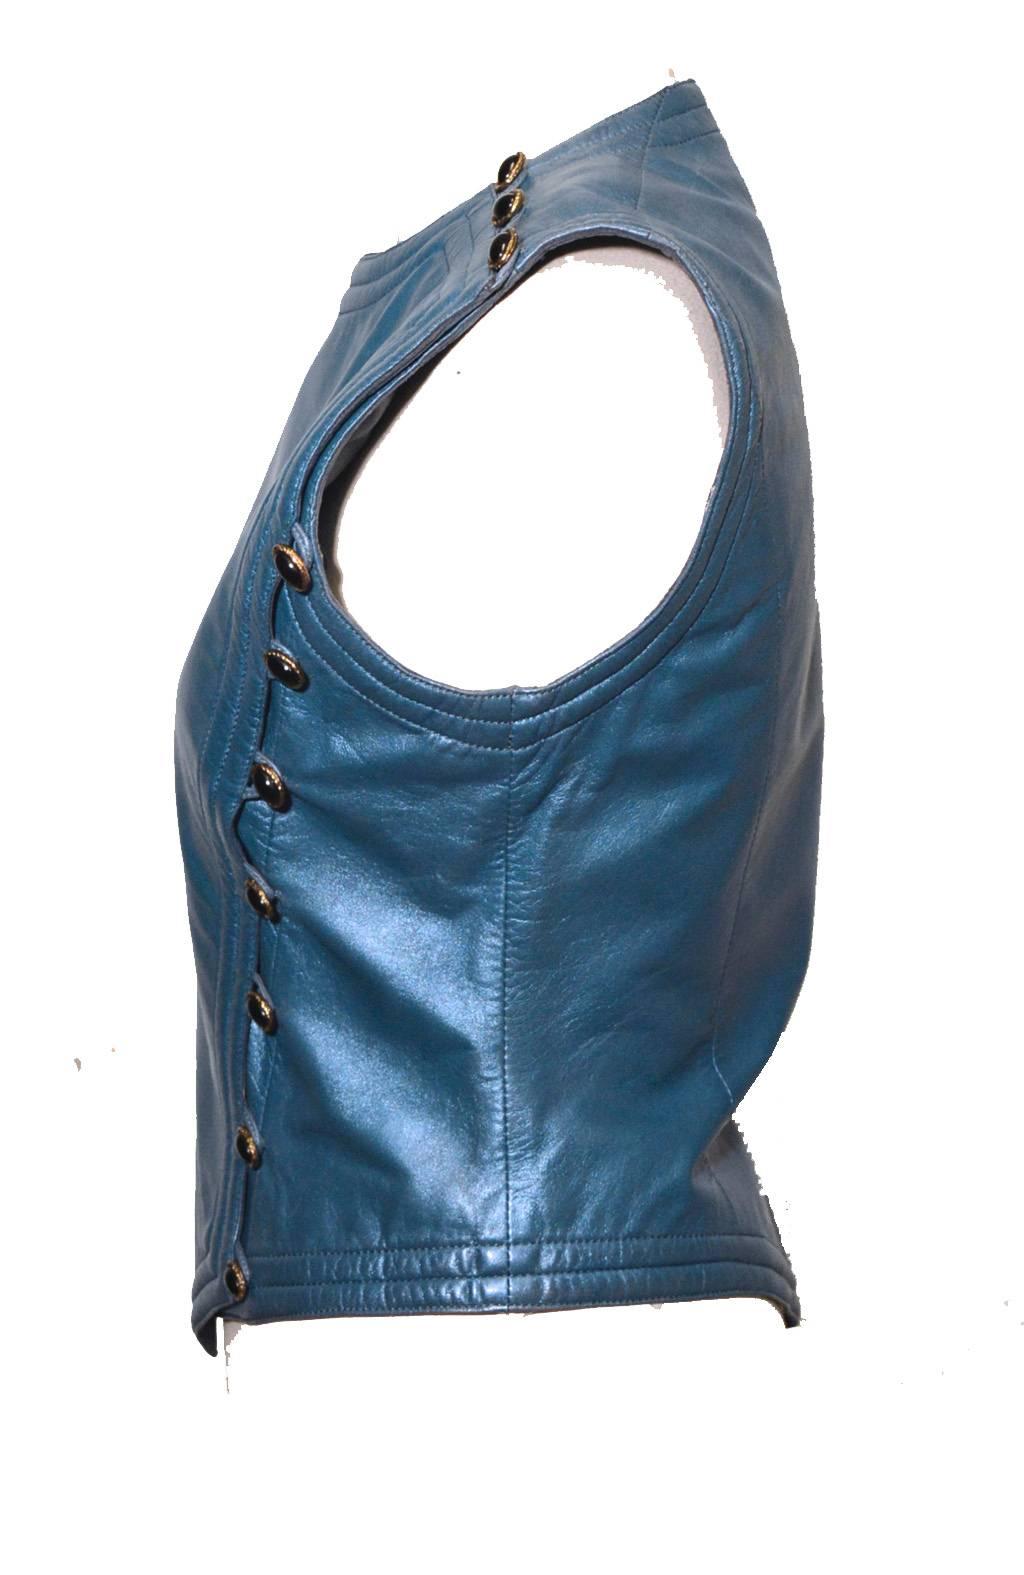 Amazing vintage Ungaro 1980s blue leather vest. 100% genuine leather in beautiful blue coloring that has a subtle shimmer to it. 3 gold and black buttons on top right shoulder and 7 more along the right side from bust to hem. Fully lined with blue